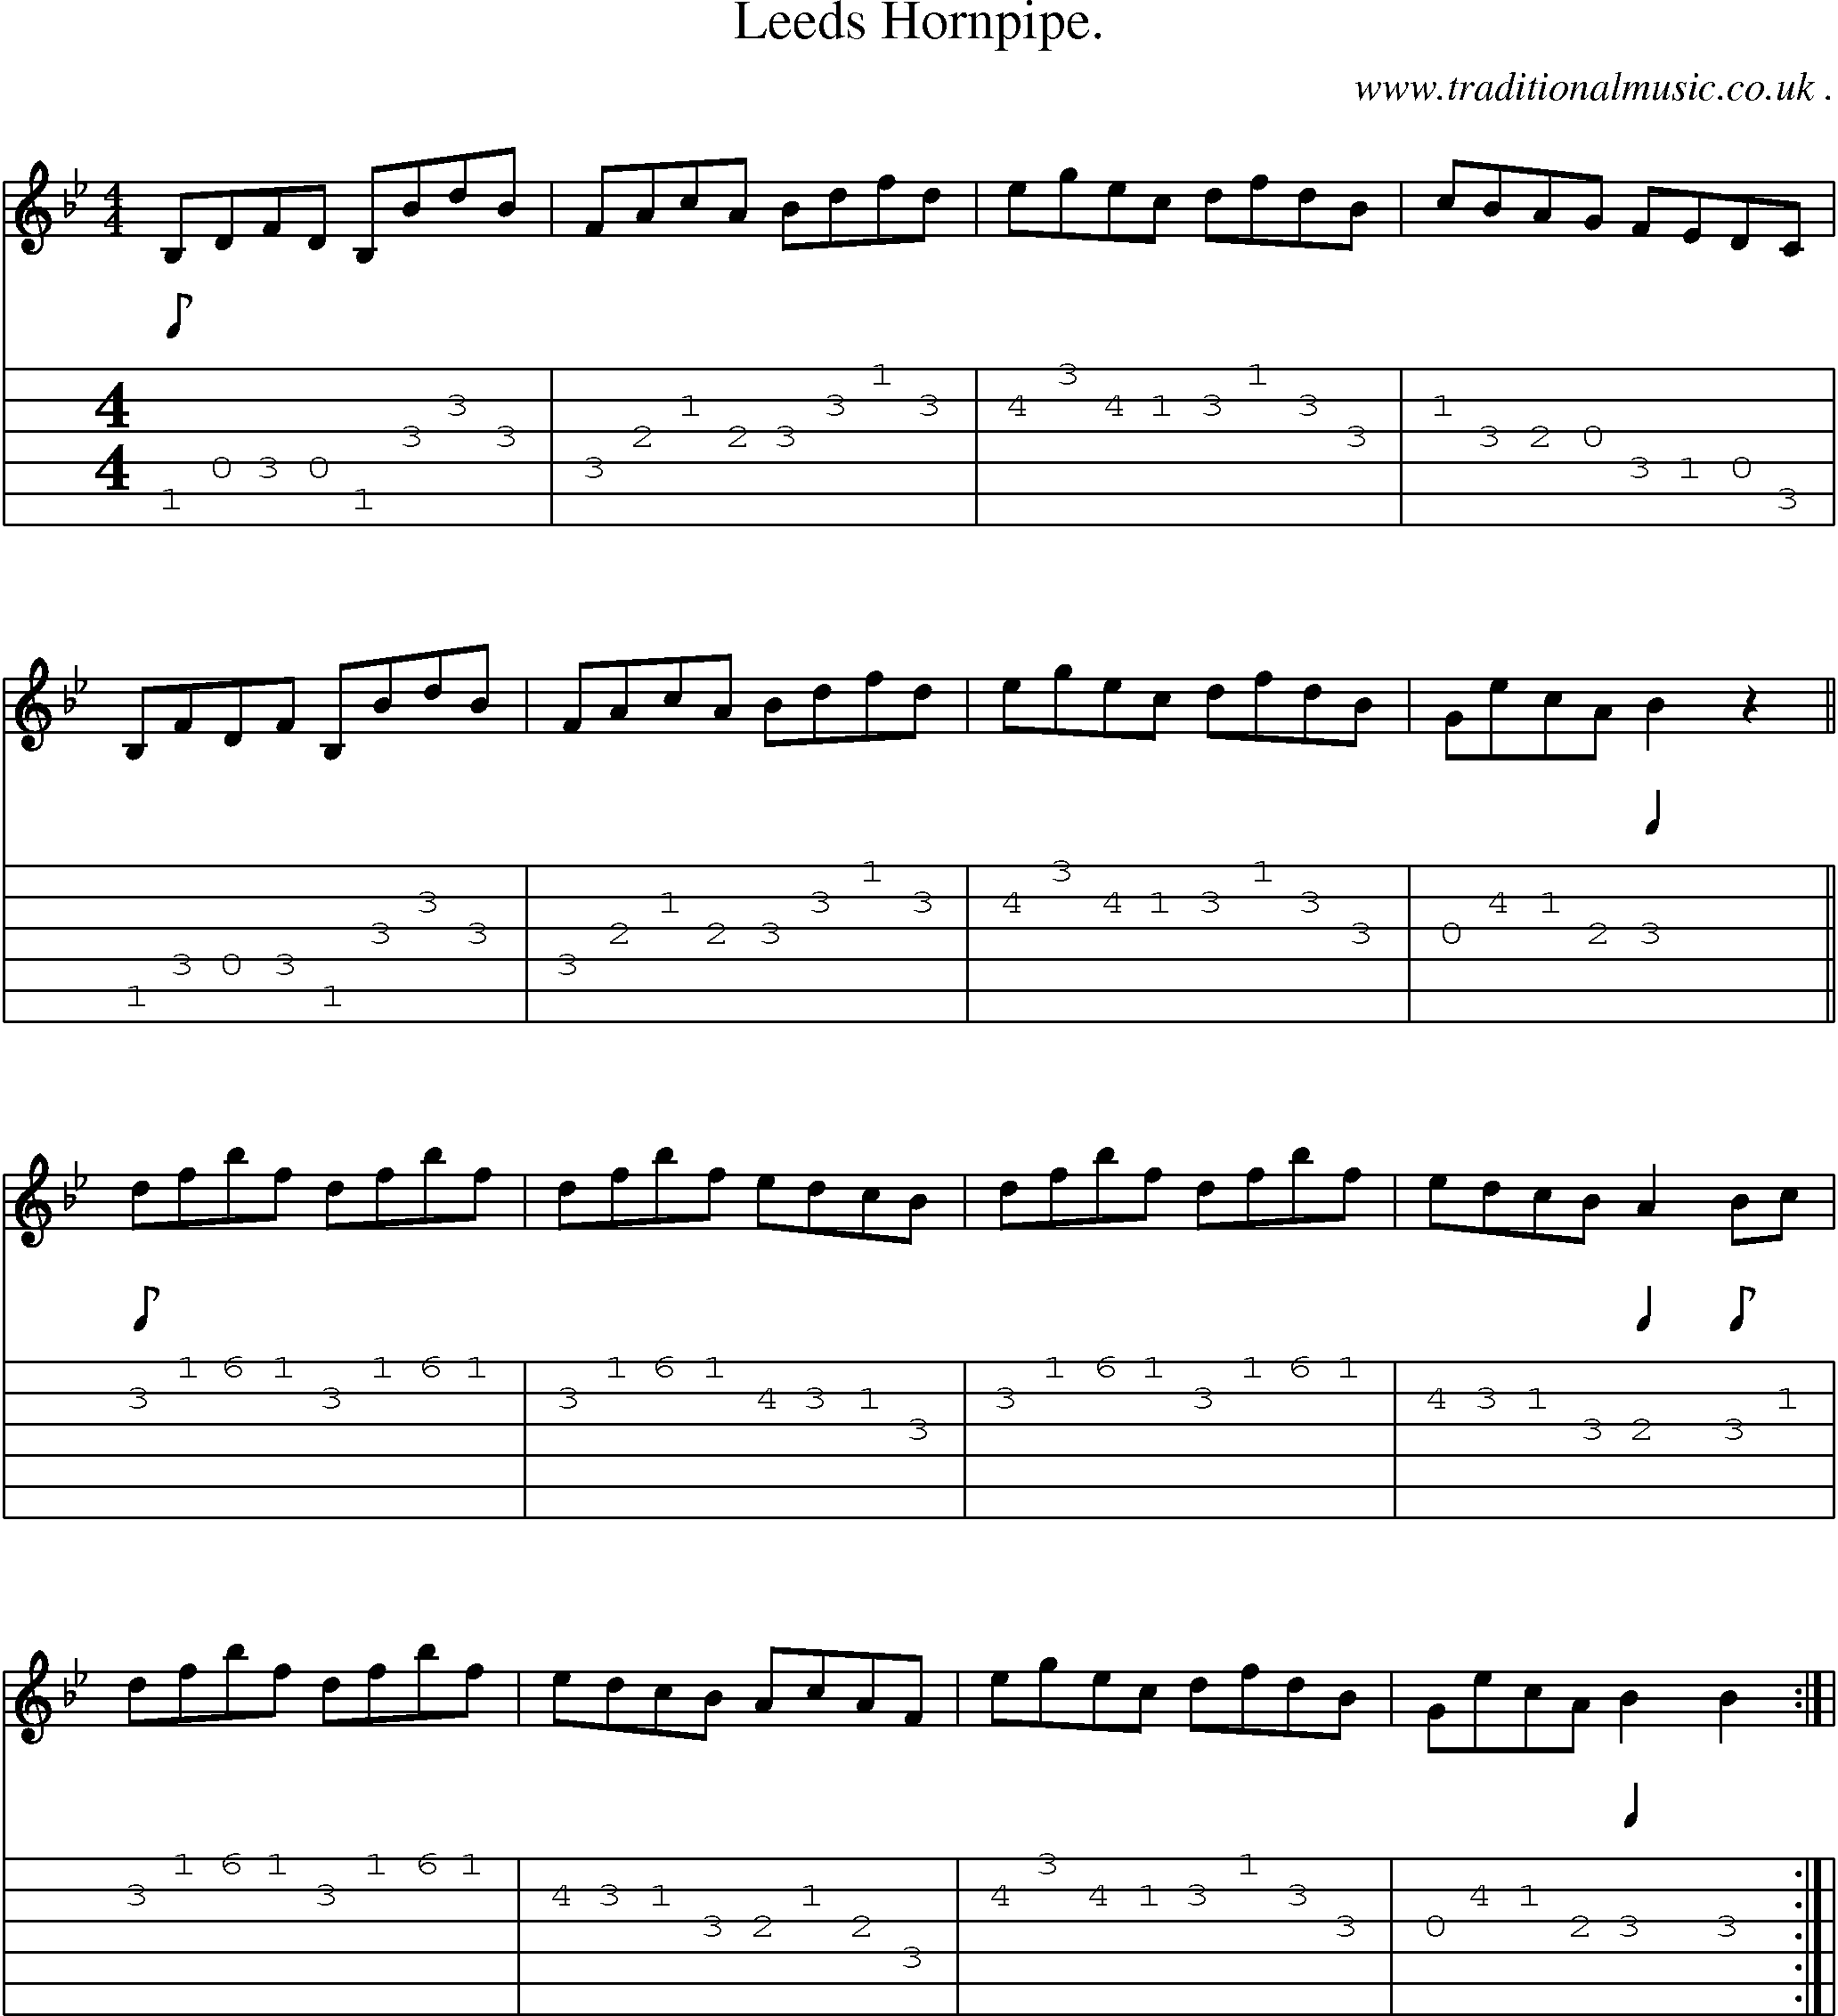 Sheet-Music and Guitar Tabs for Leeds Hornpipe